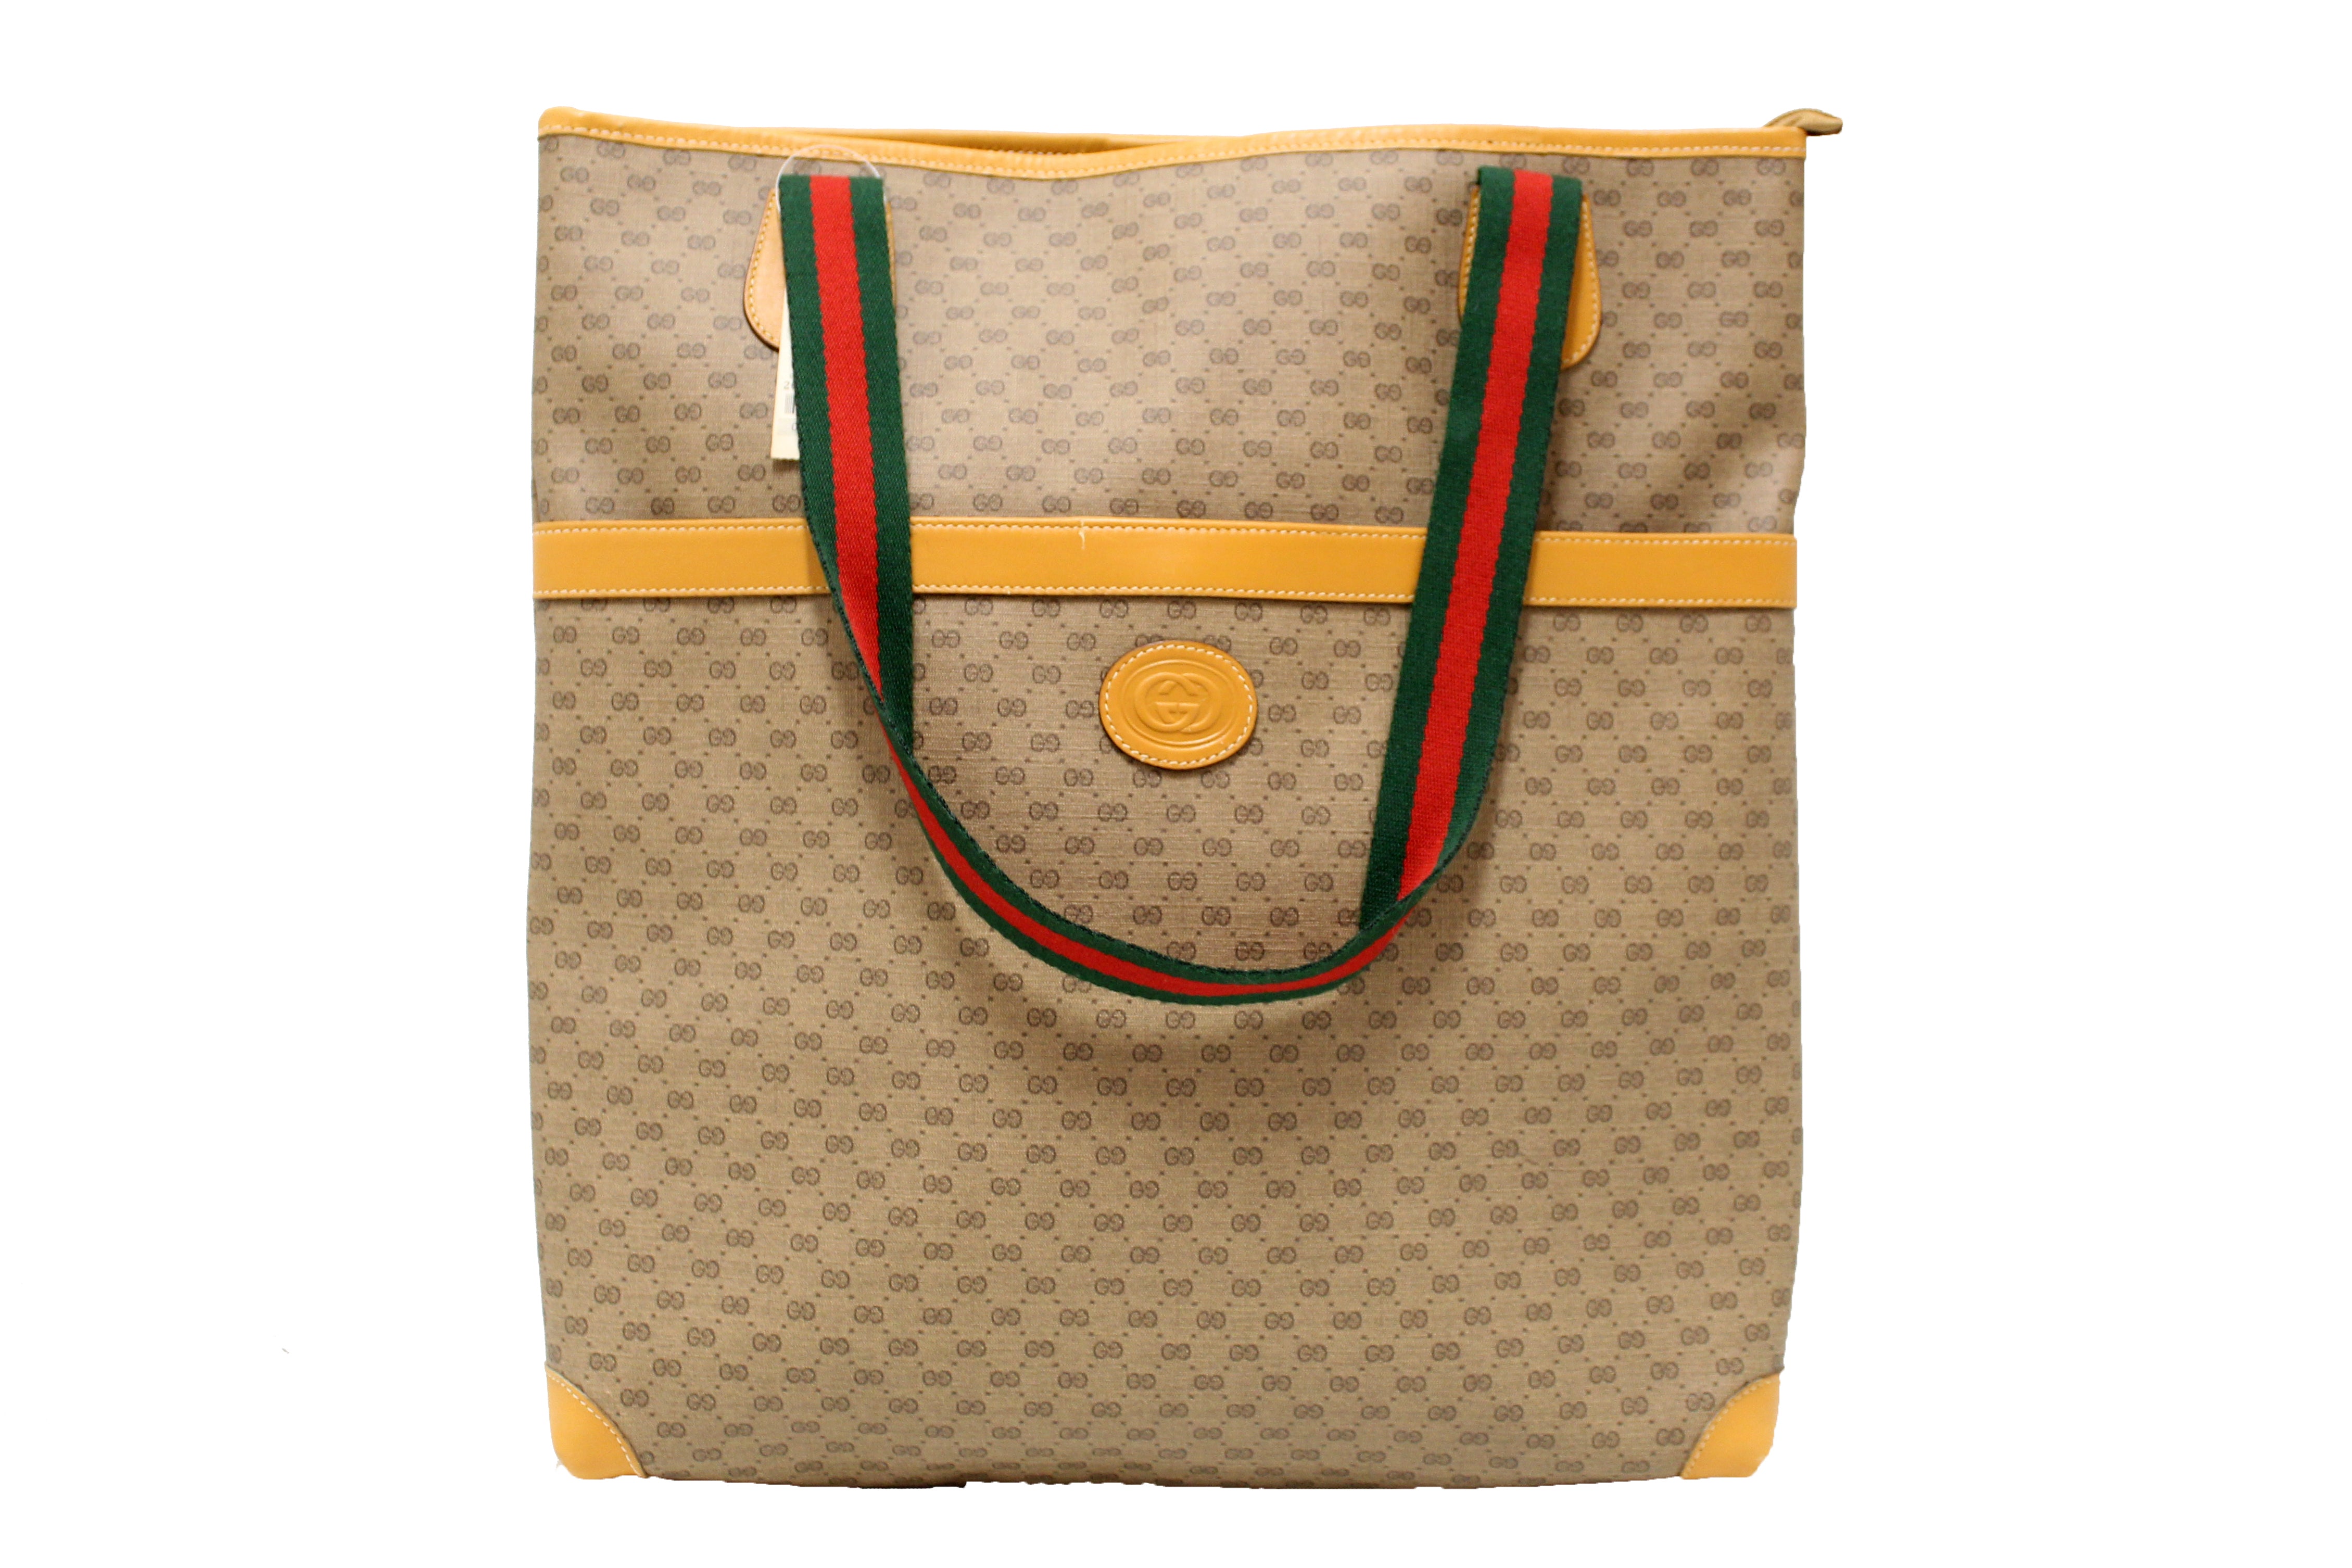 Authentic Gucci Vintage Brown GG Canvas with Web Stripes Strap Tote Bag